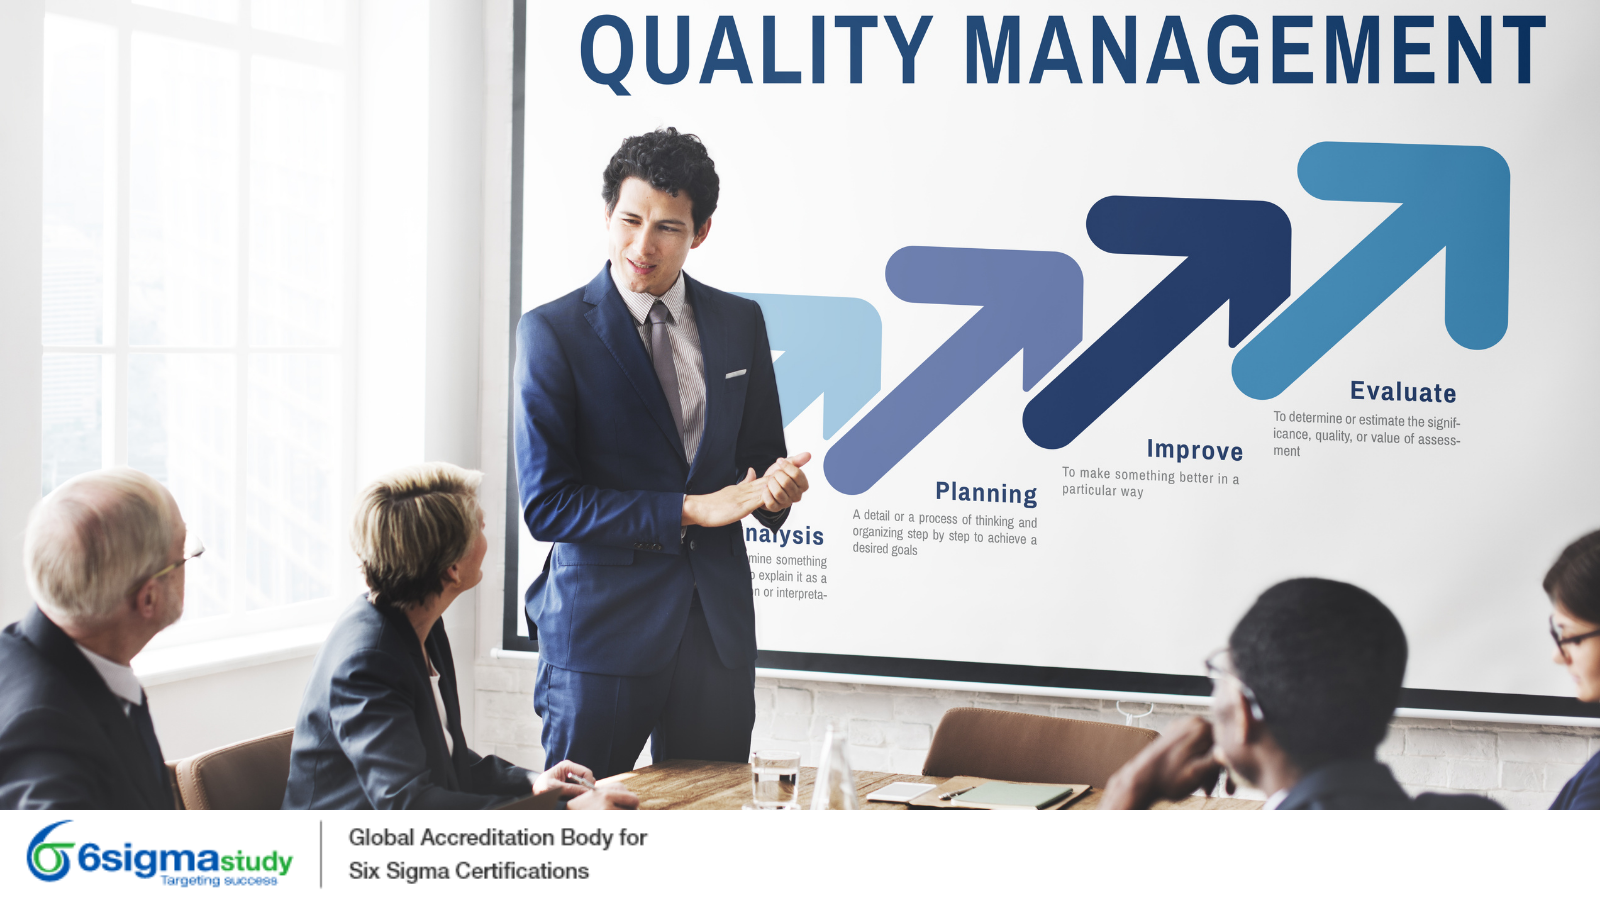 Importance of Enterprise-Wide View for Quality Management